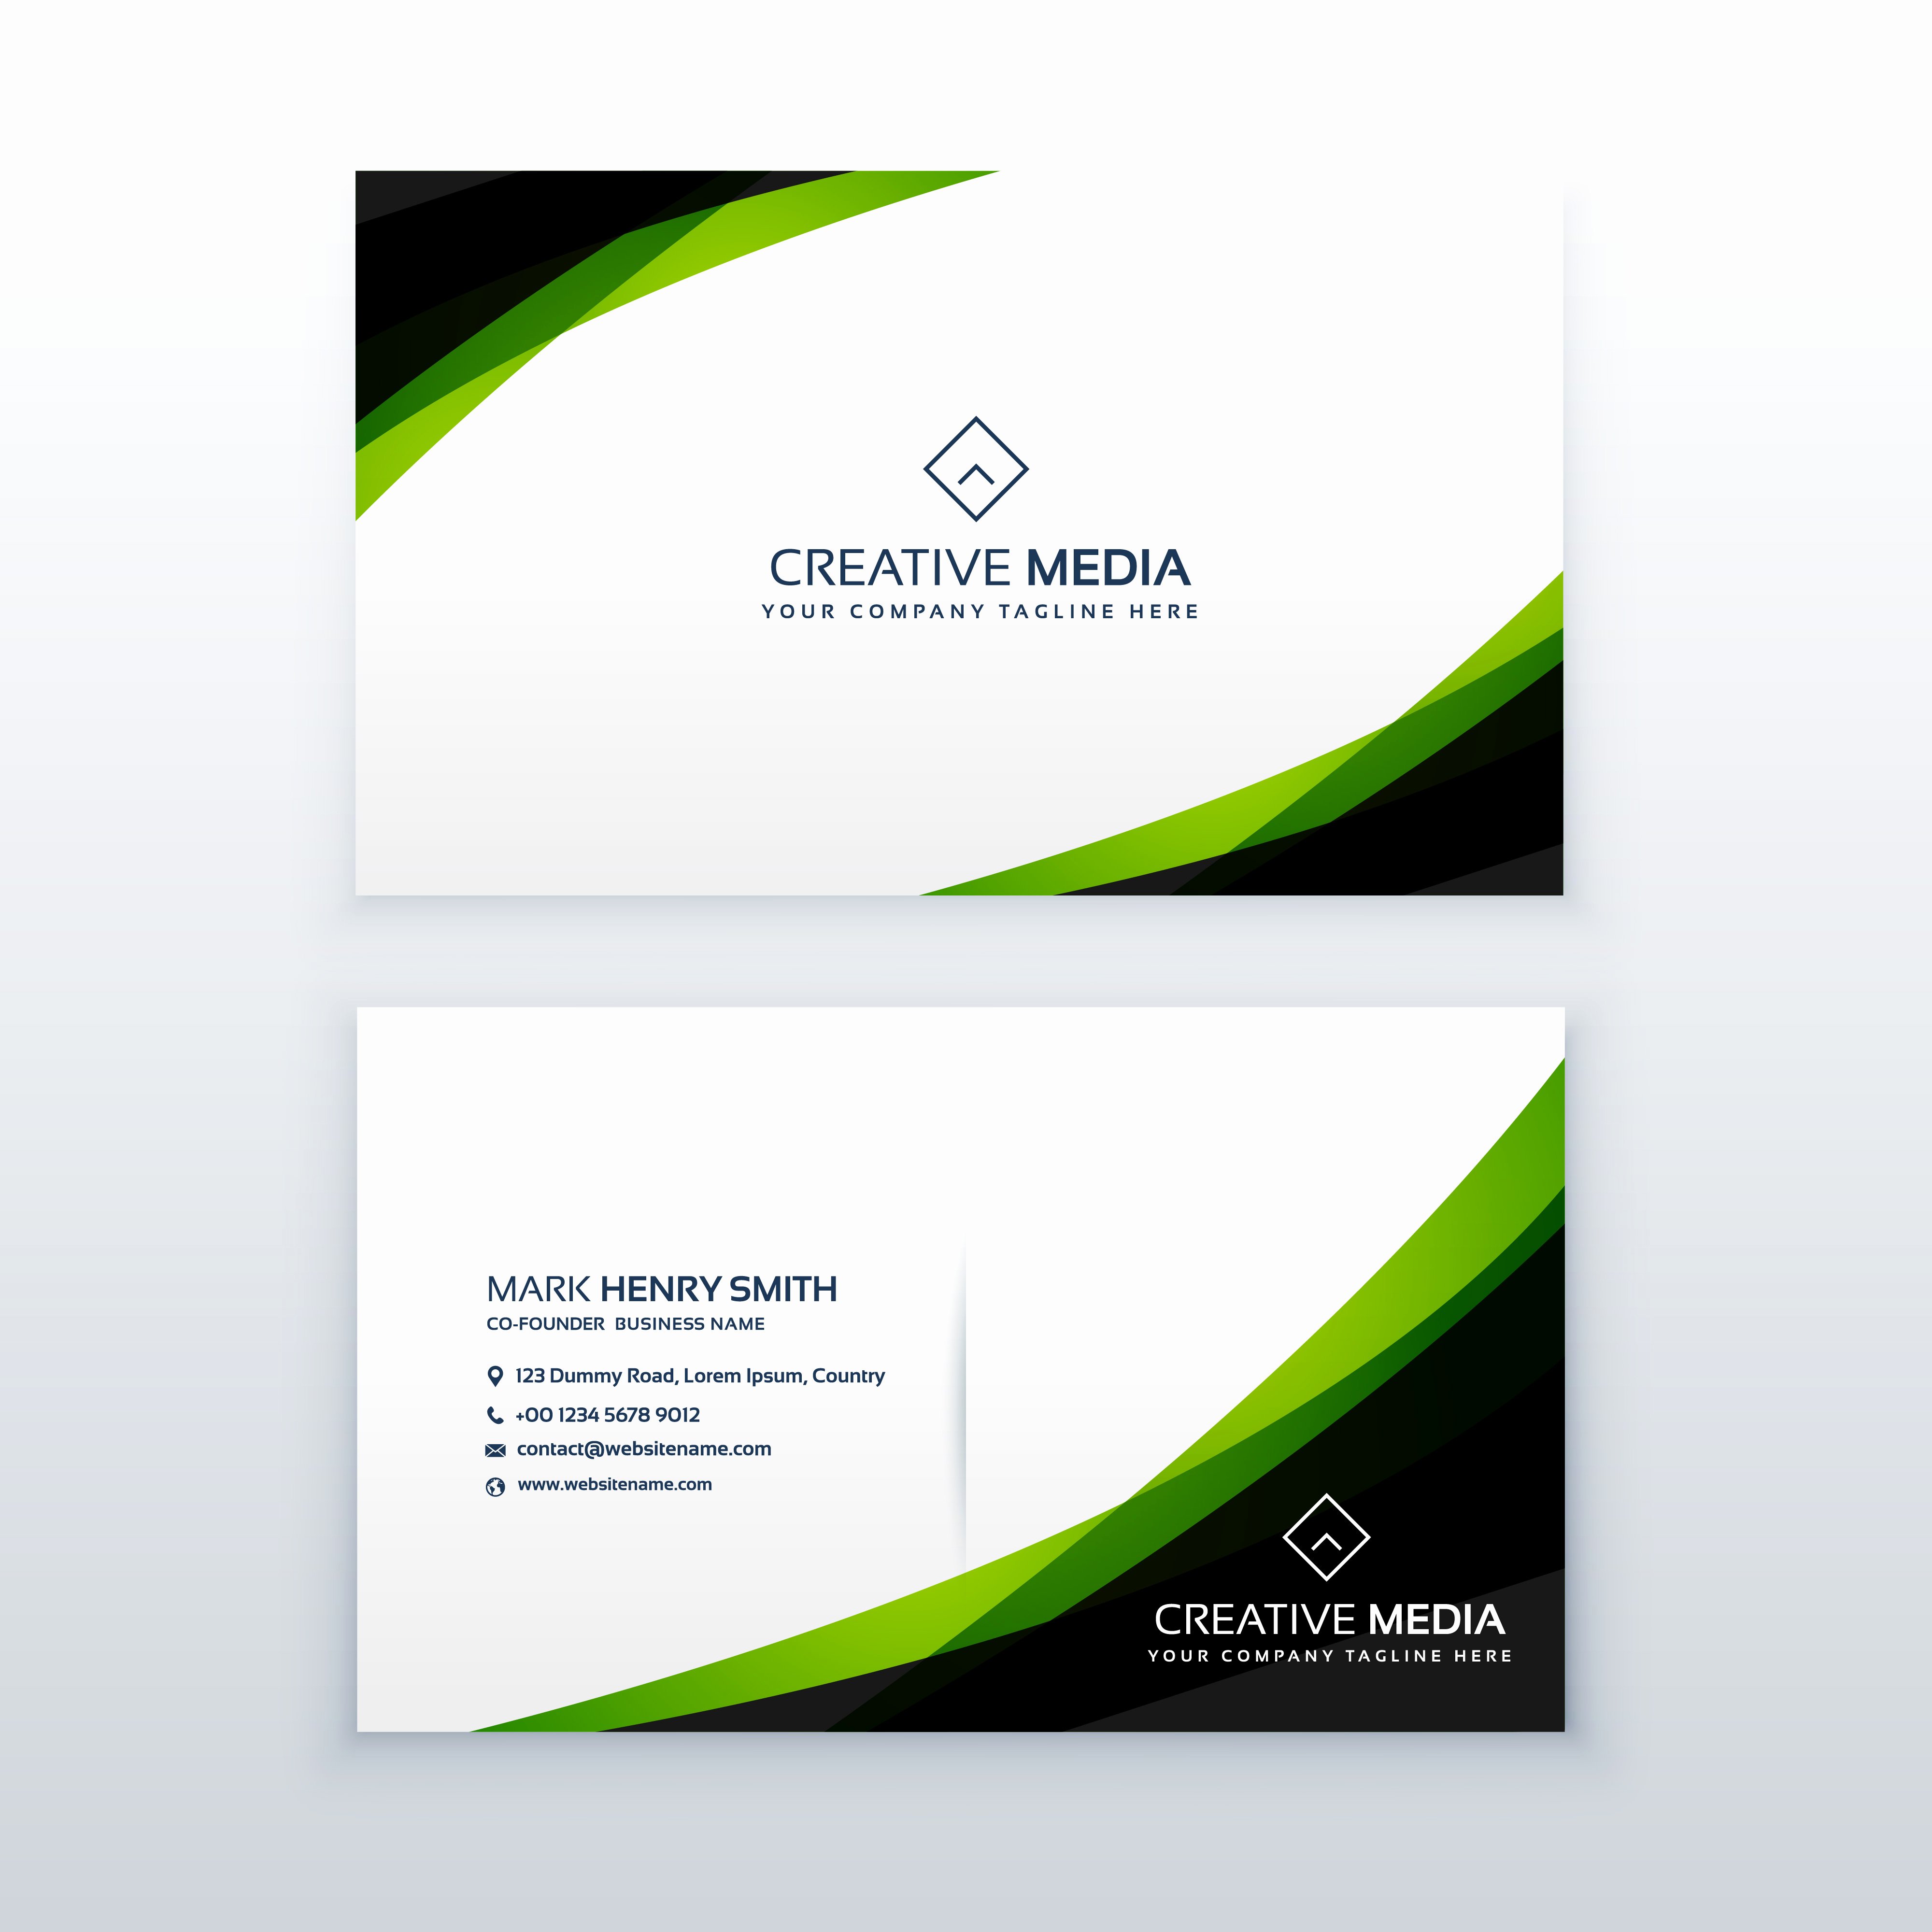 Business Card Images Free Inspirational Clean Simple Green Business Card Design Template